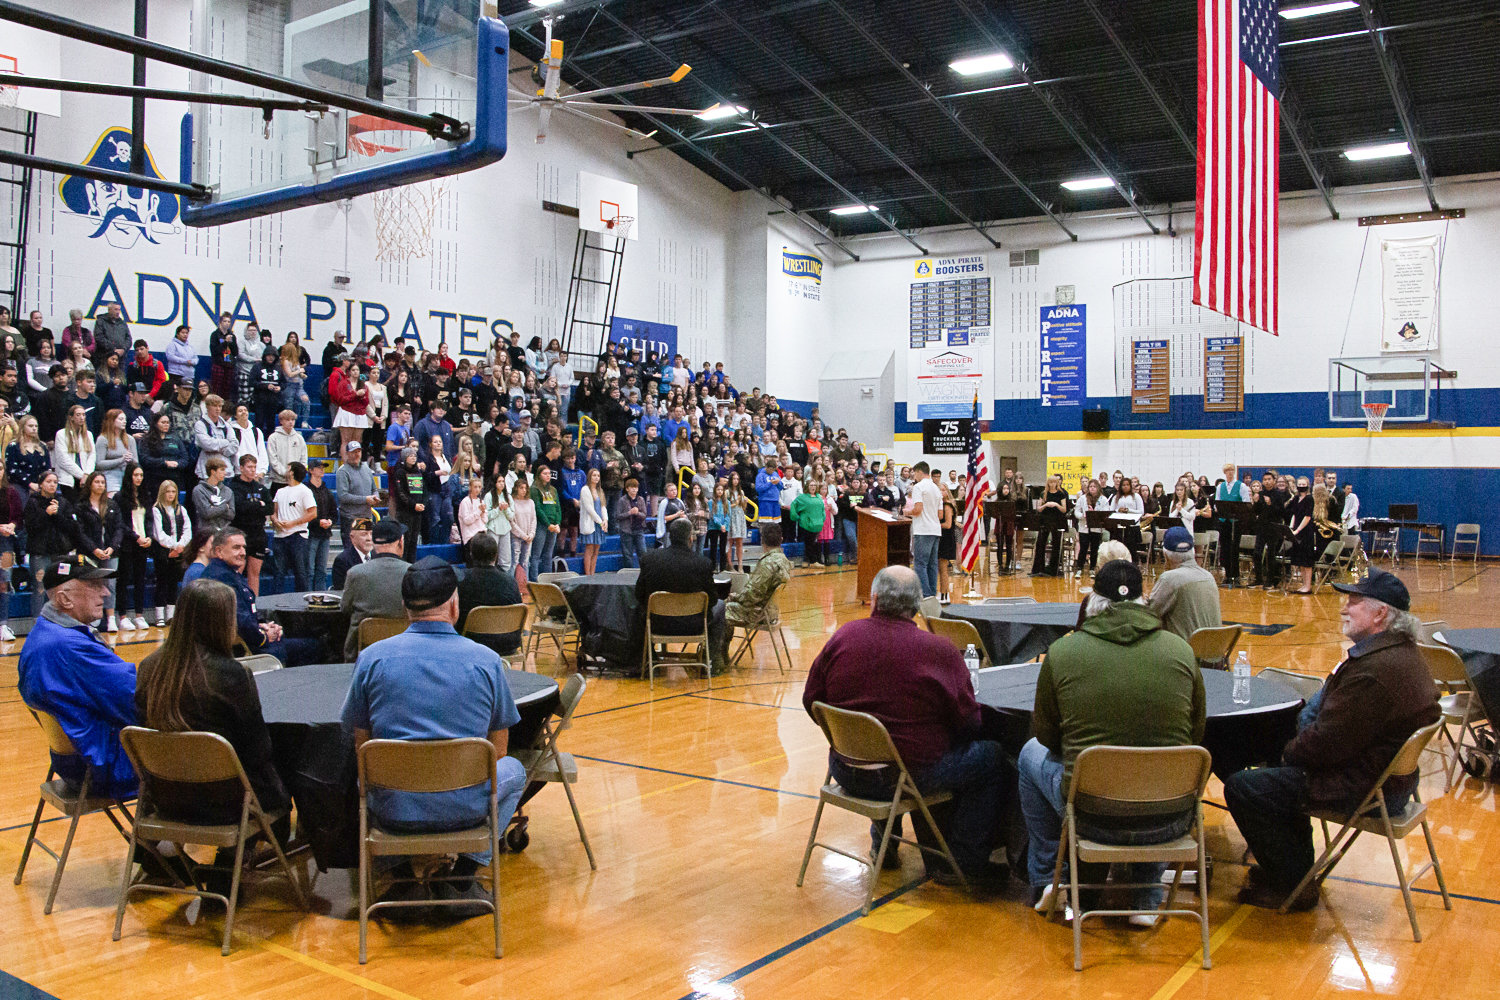 Students and veterans all gathered in Adna High School's gymnasium for the school's Veterans Day assembly on Tuesday morning.